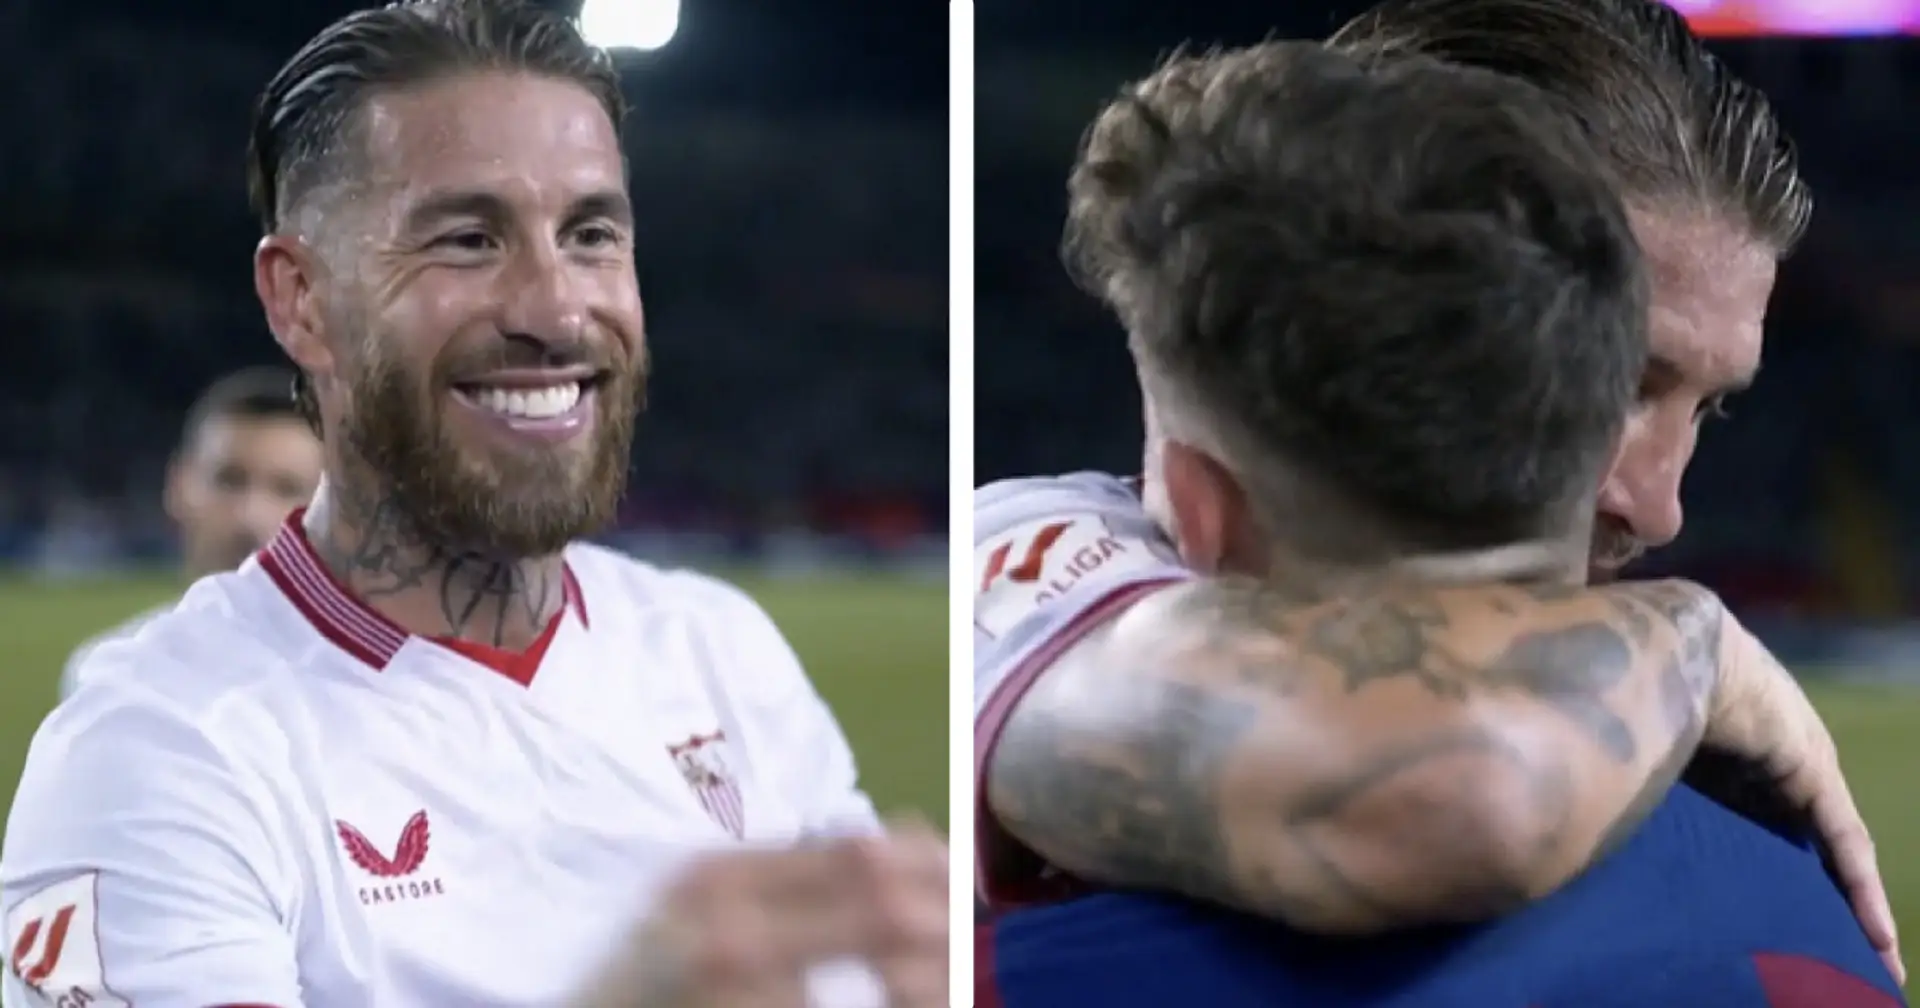 Sergio Ramos' warm moment with one Barca player after final whistle caught on camera